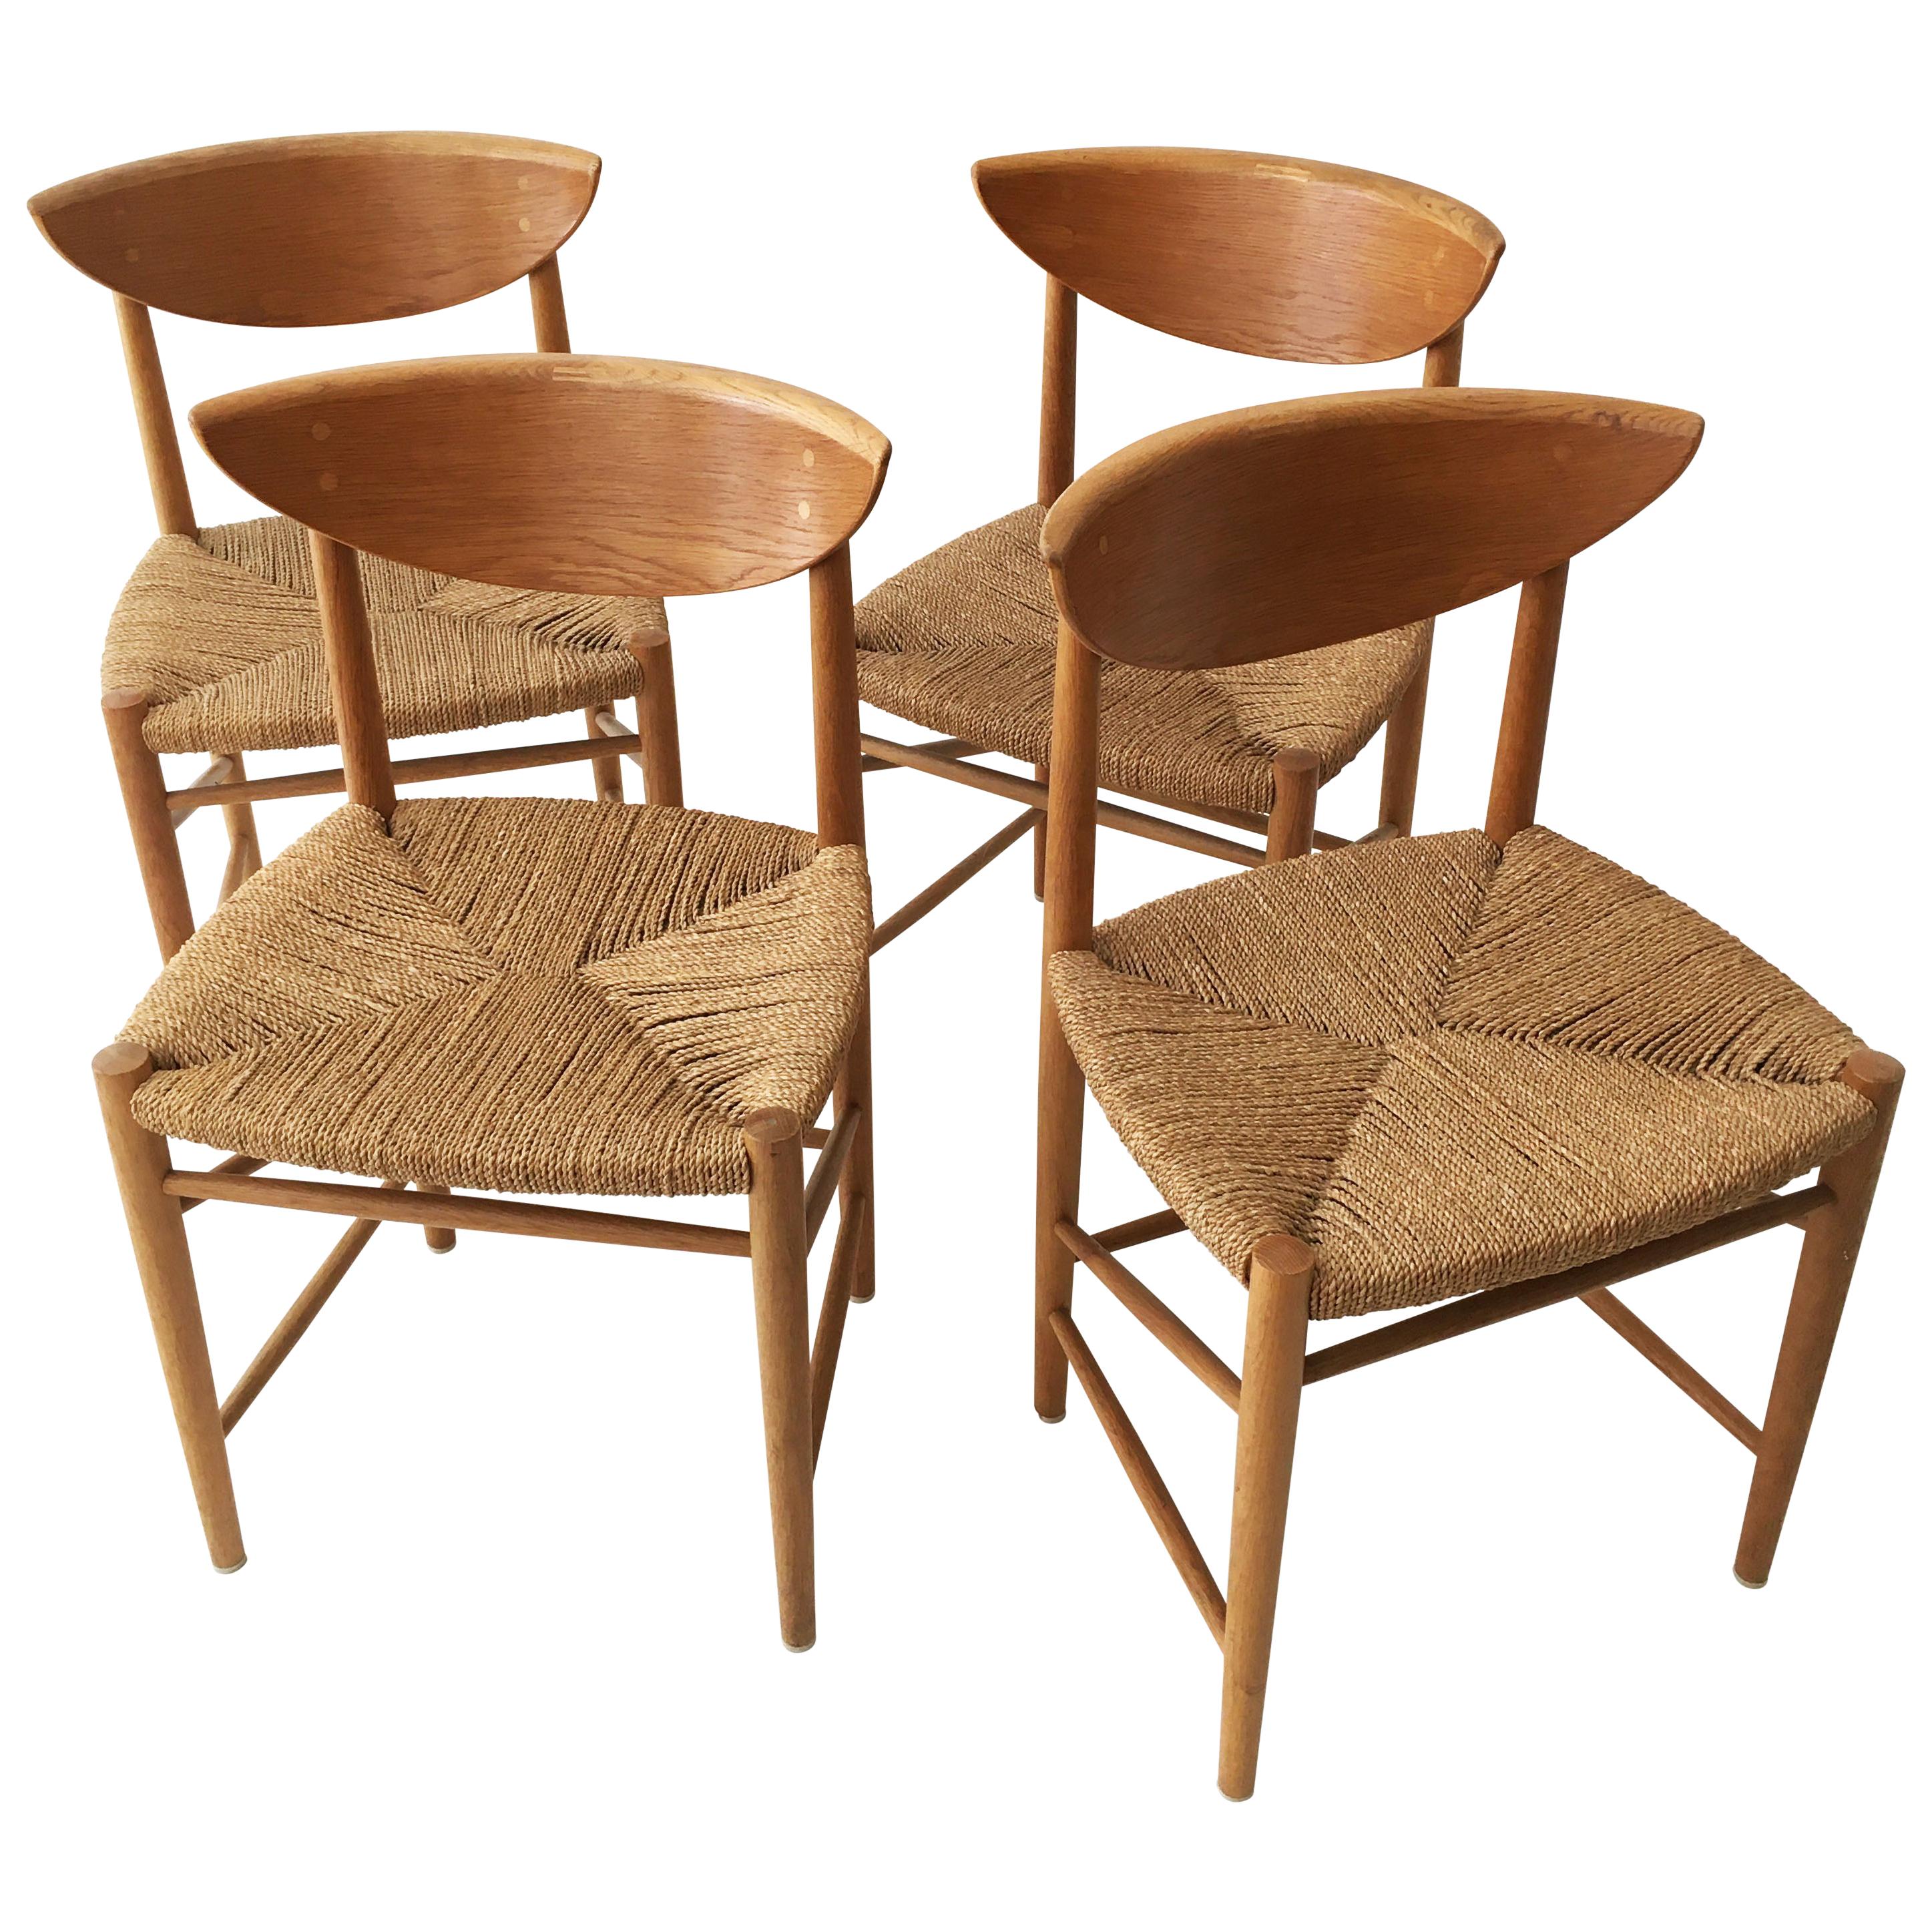 Hvidt and Molgaard-Nielsen Set of Four Oak and Cord Chairs, Denmark, 1950s